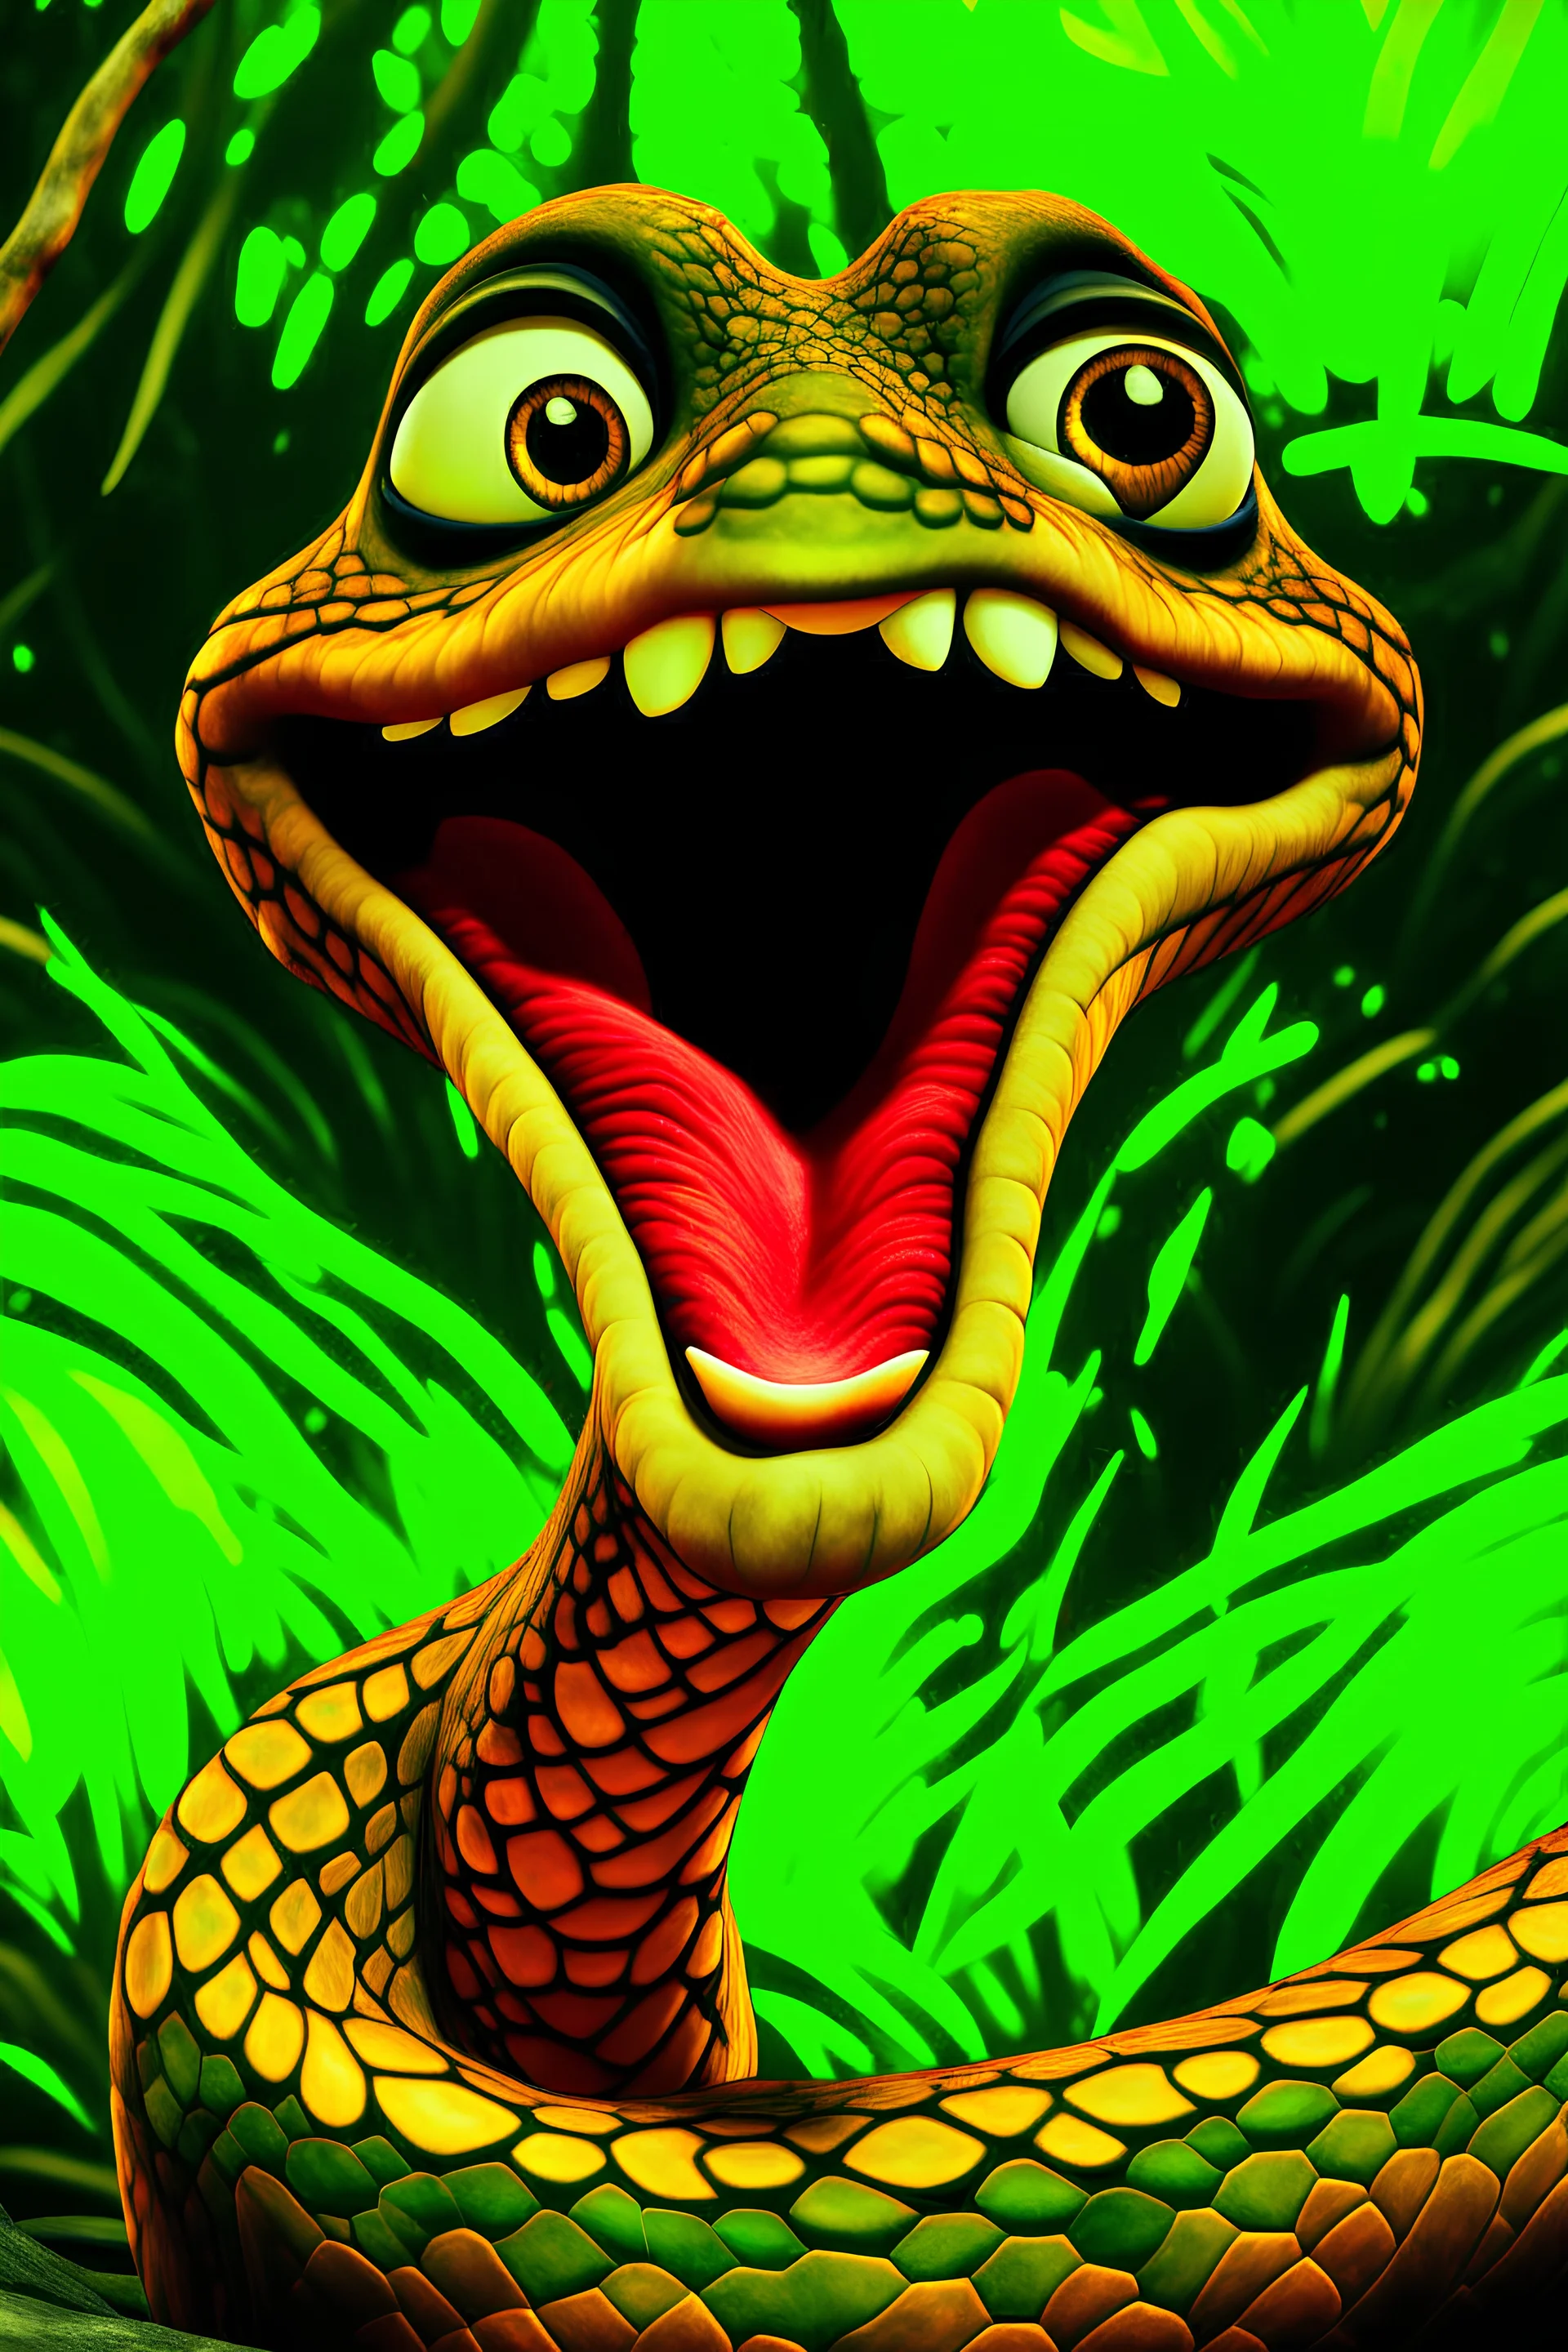 kaa the brown snake from disney's the jungle book using his hypnotic powers